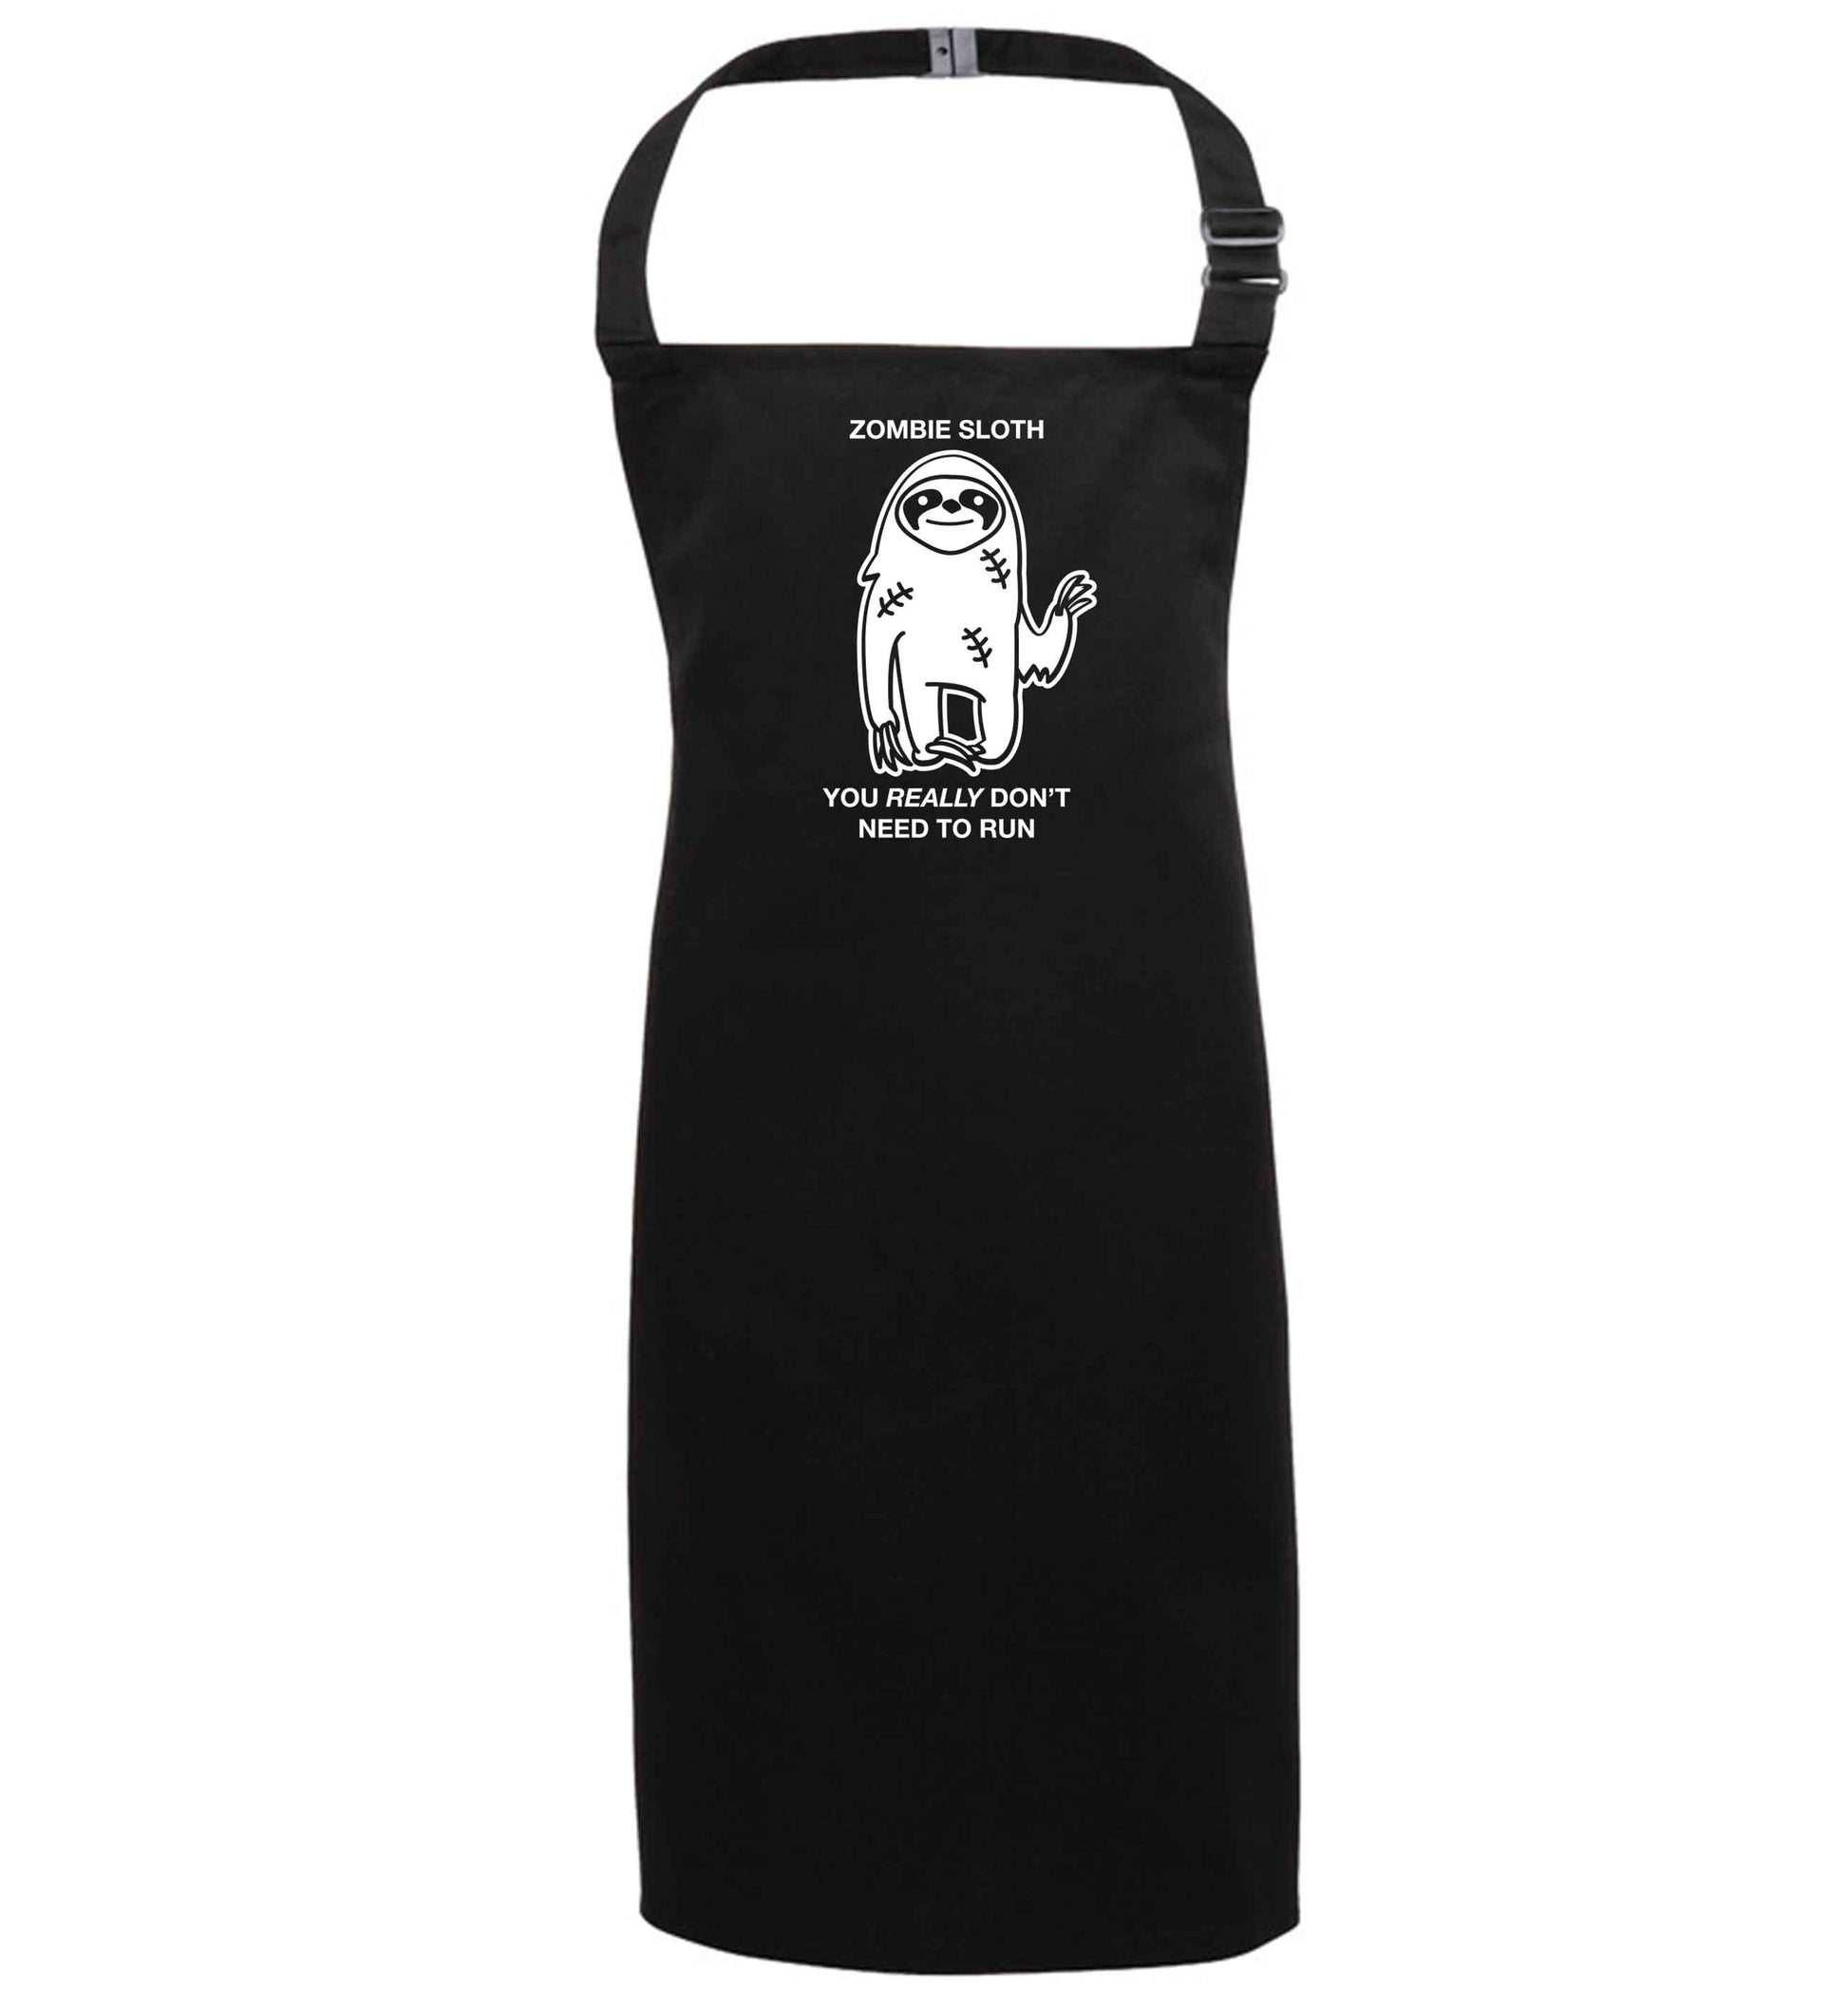 Zombie sloth you really don't need to run black apron 7-10 years